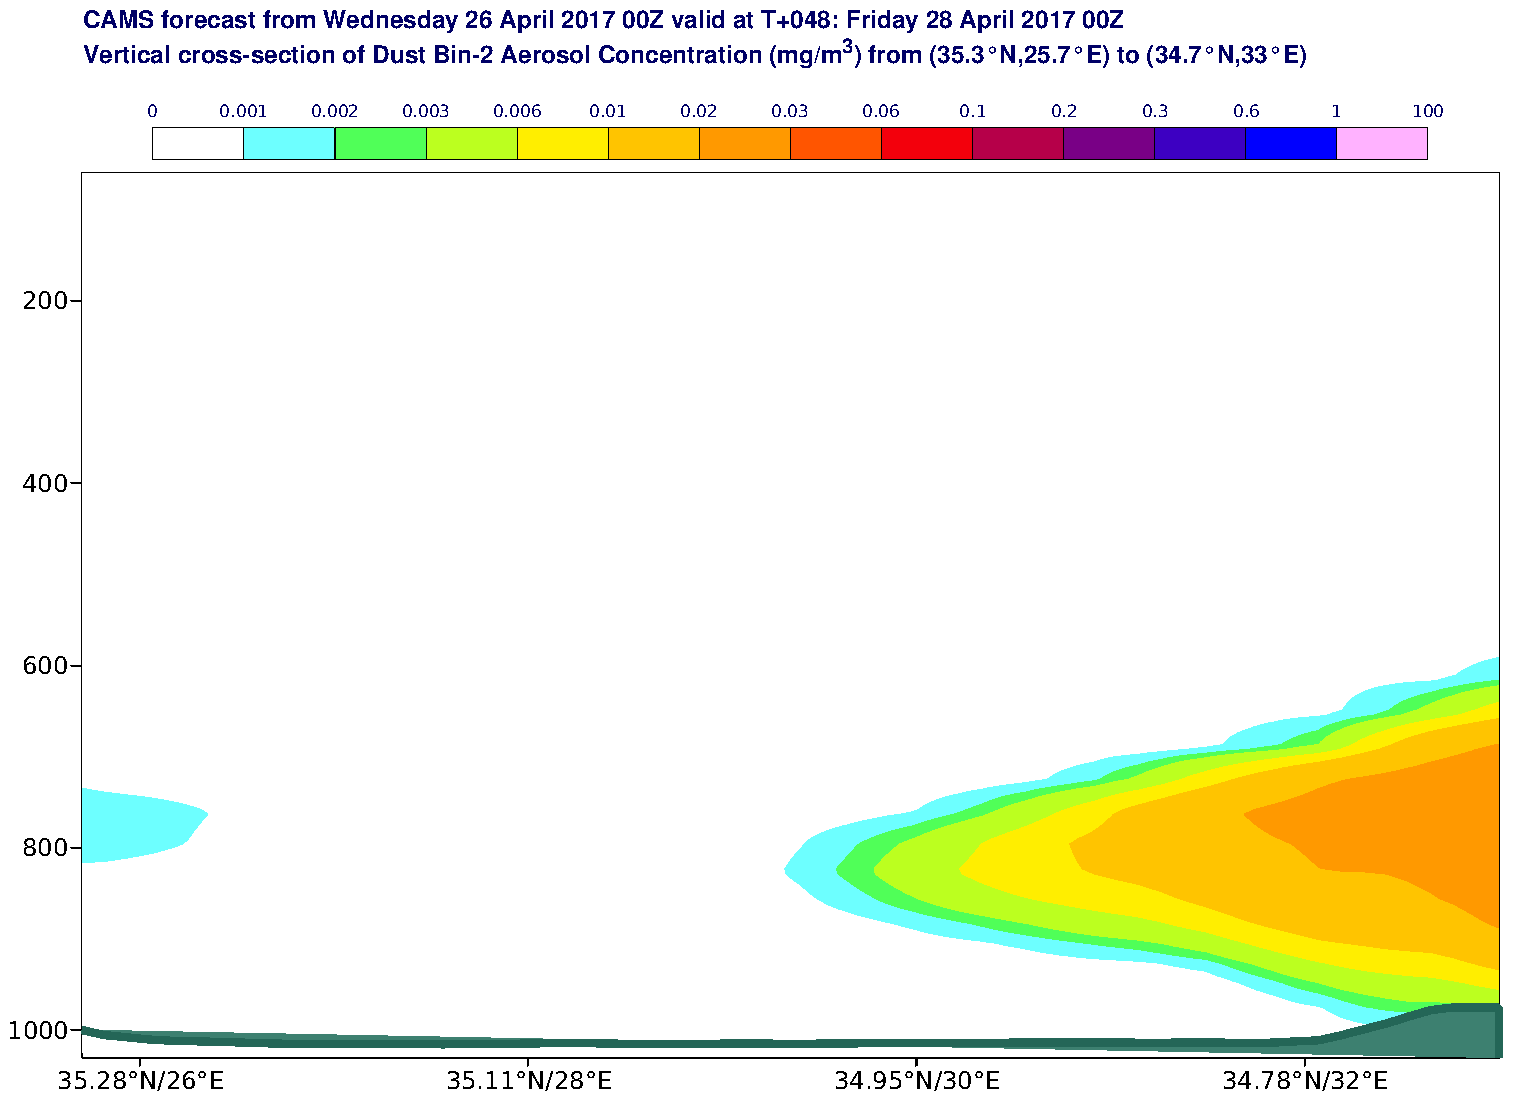 Vertical cross-section of Dust Bin-2 Aerosol Concentration (mg/m3) valid at T48 - 2017-04-28 00:00